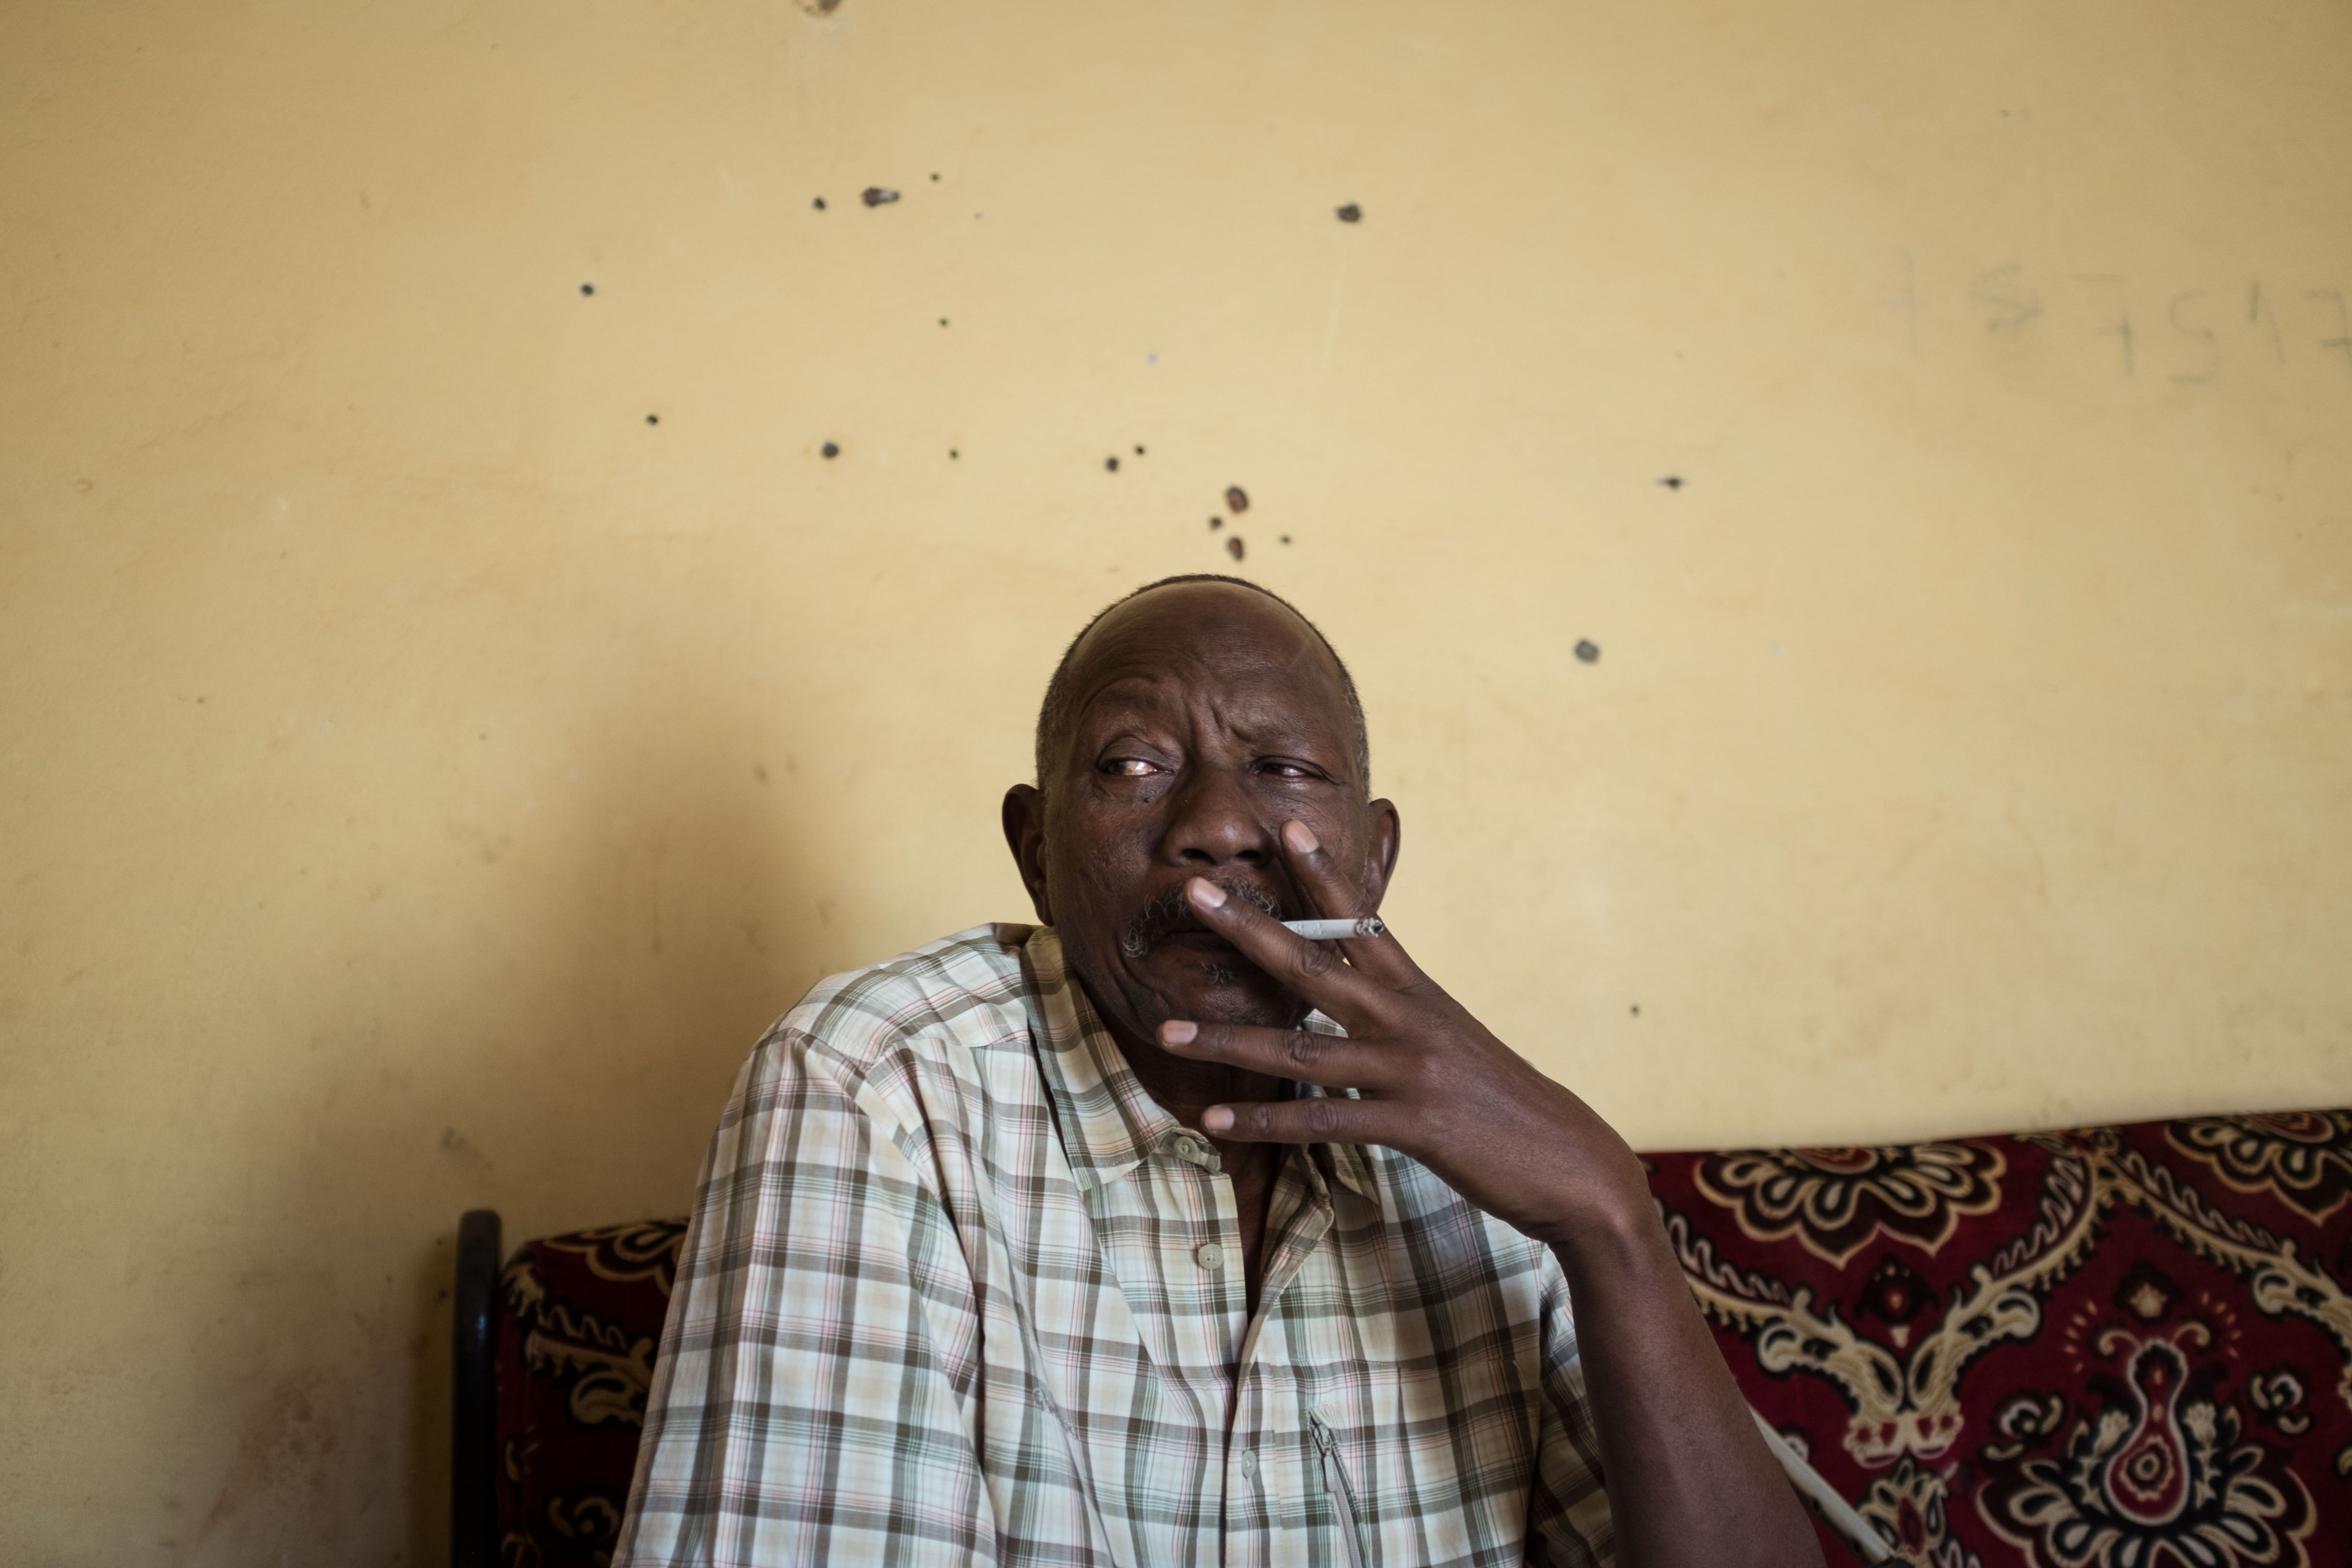 Ibrahim Alawad, of the FPRC armed group. Image by Dennis & Patrick Weinert. Central African Republic, 2018.